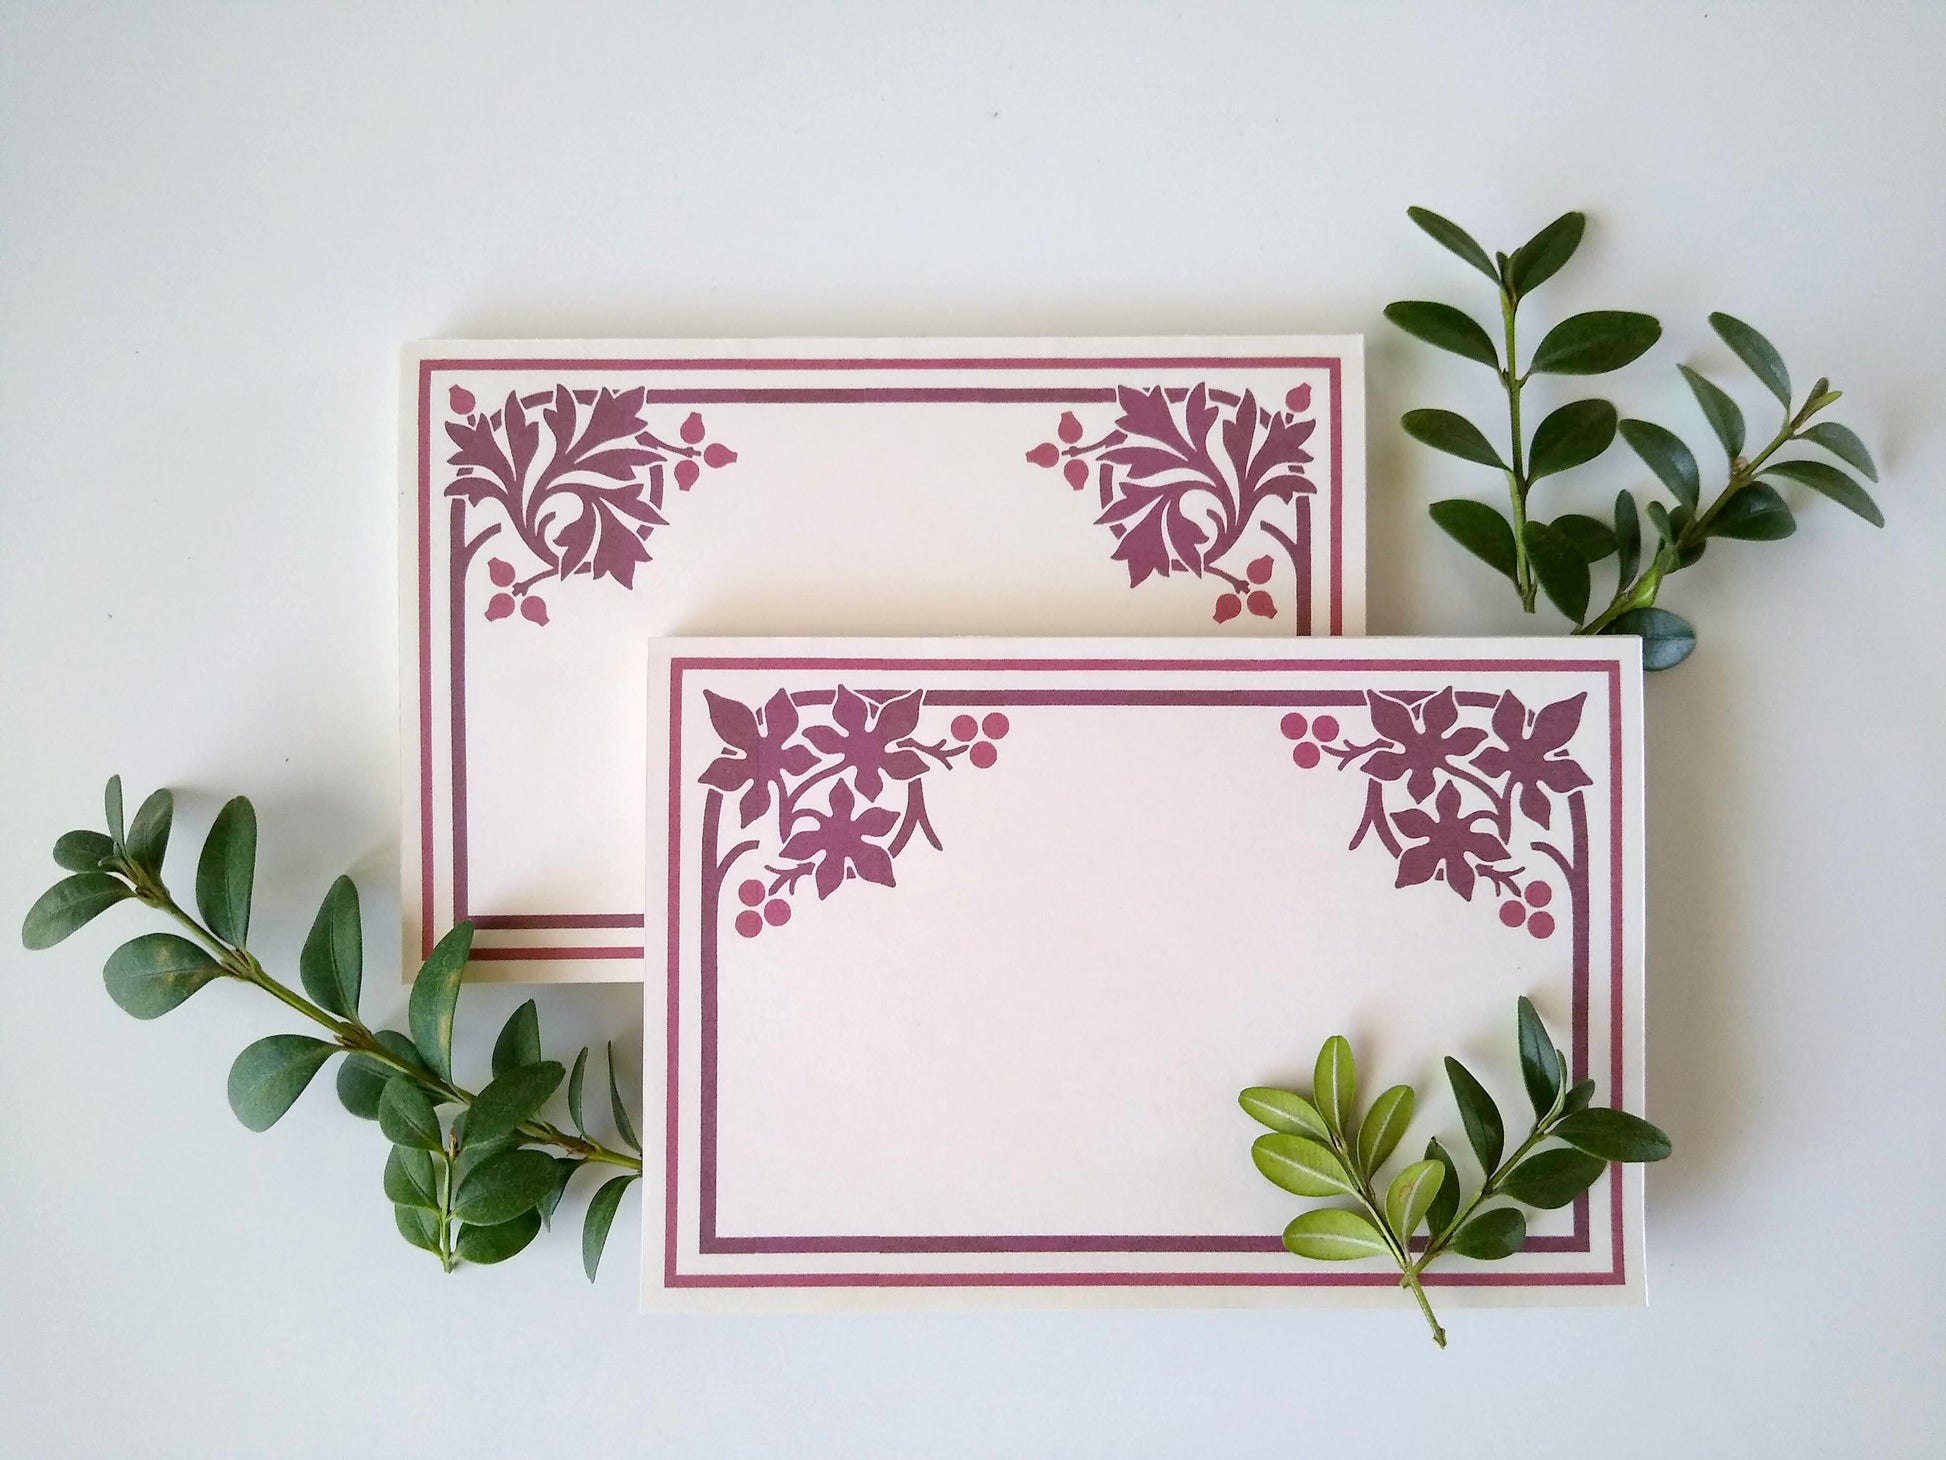 Two cream colored notepads rest on a white background. Sprigs of leaves rest around them. Each notepad has a stylized fall leaf design in burgundy in both upper corners with a double line border around the rest of the notepad.